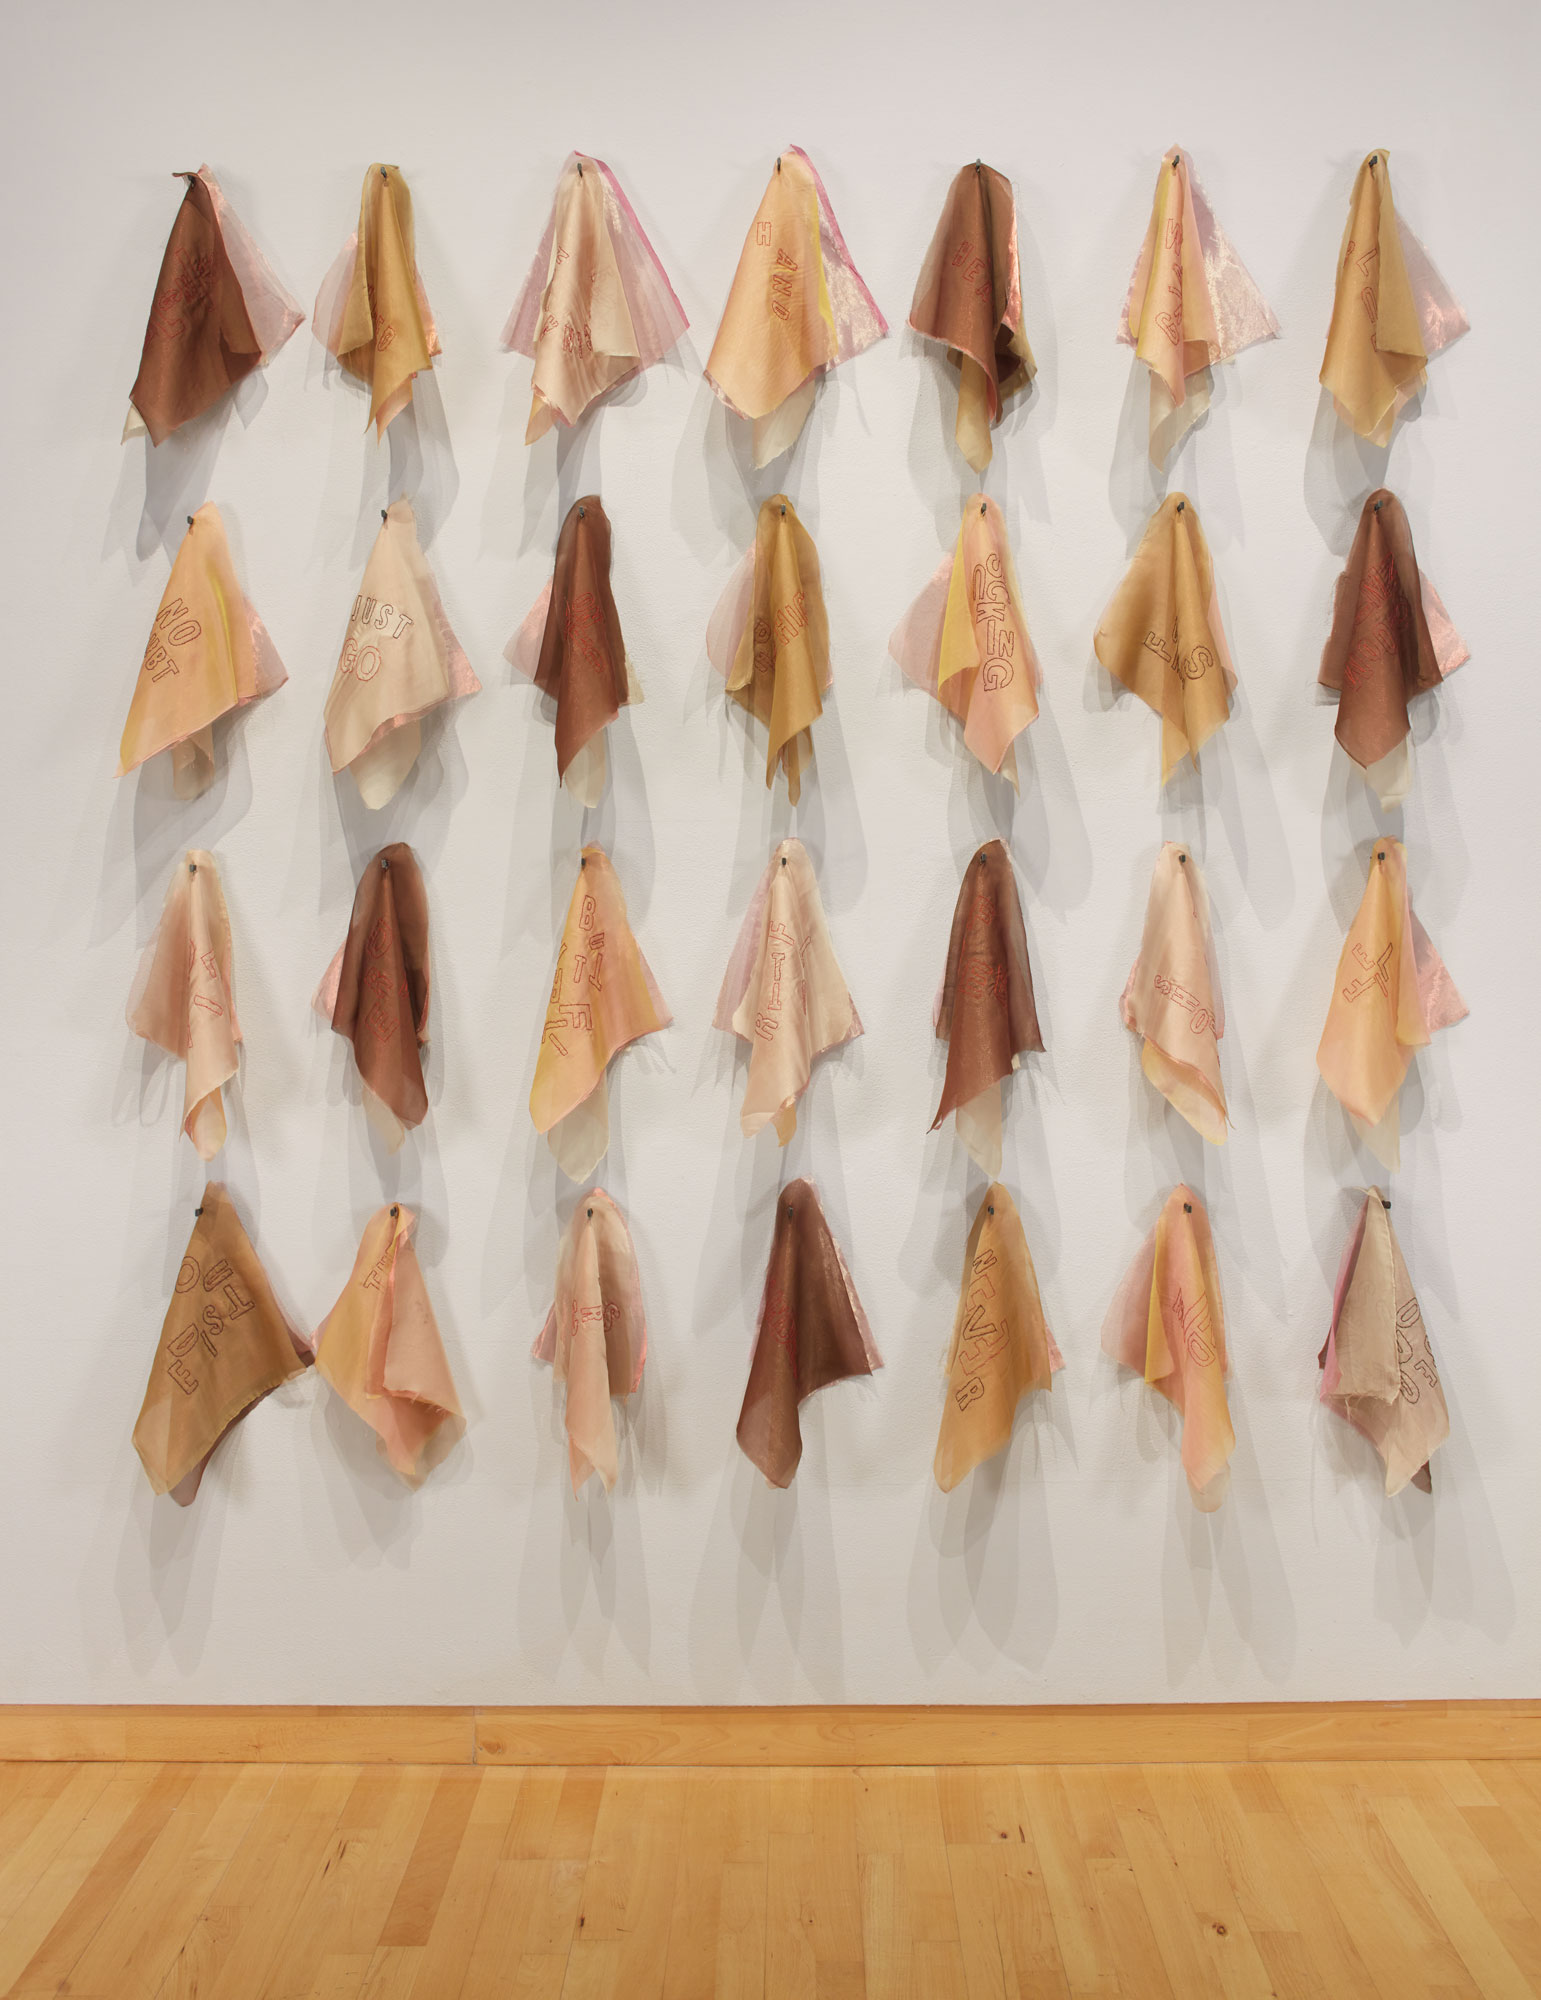 Rosemarie Chiarlone, Consequence, 2019. embroidered silk organza sewn to silk chiffon leaves, masonry nails. text by poet Susan Weiner. 14 x 14 in., each of 28 fabric pieces; 112 x 90 x 7 in. as installed. Courtesy of the artist and Priscilla Juvelis Rare Books. Installation view of Skyway 20/21 exhibition at USF Contemporary Art Museum. Photo: Will Lytch.